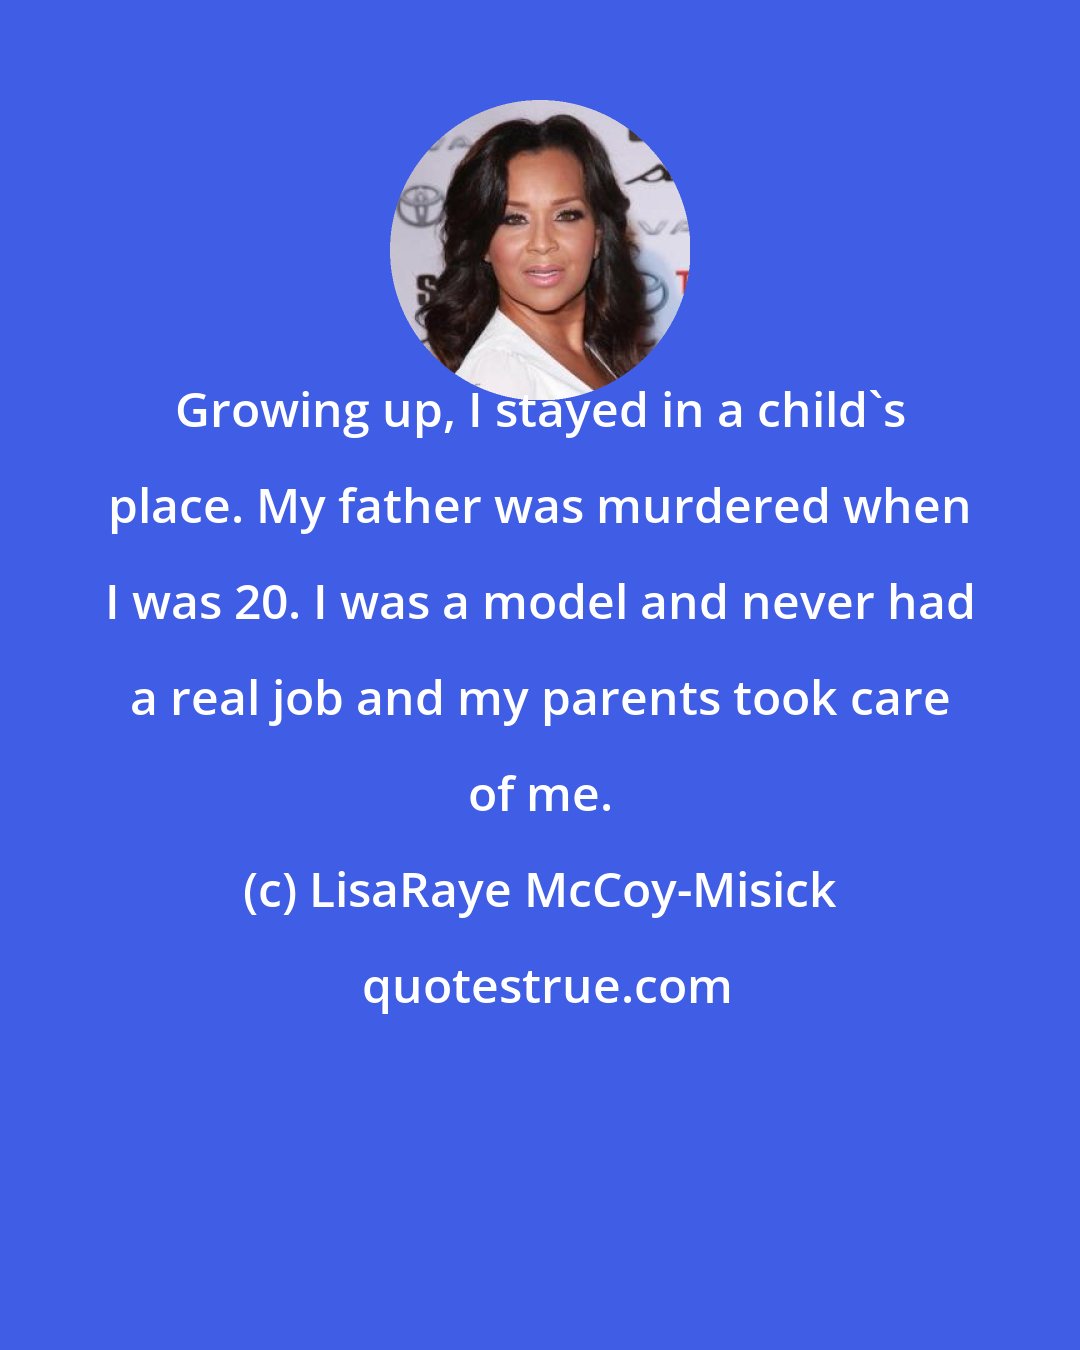 LisaRaye McCoy-Misick: Growing up, I stayed in a child's place. My father was murdered when I was 20. I was a model and never had a real job and my parents took care of me.